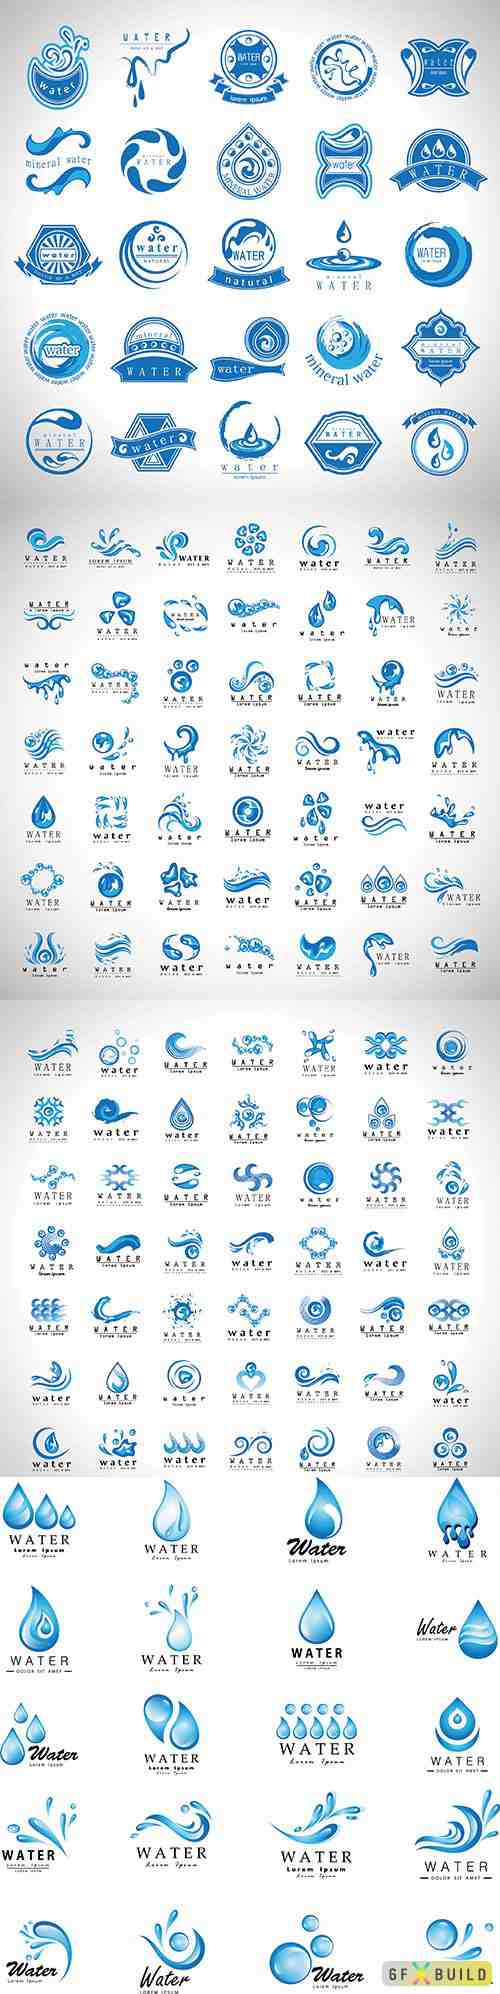 Water and drop icons set